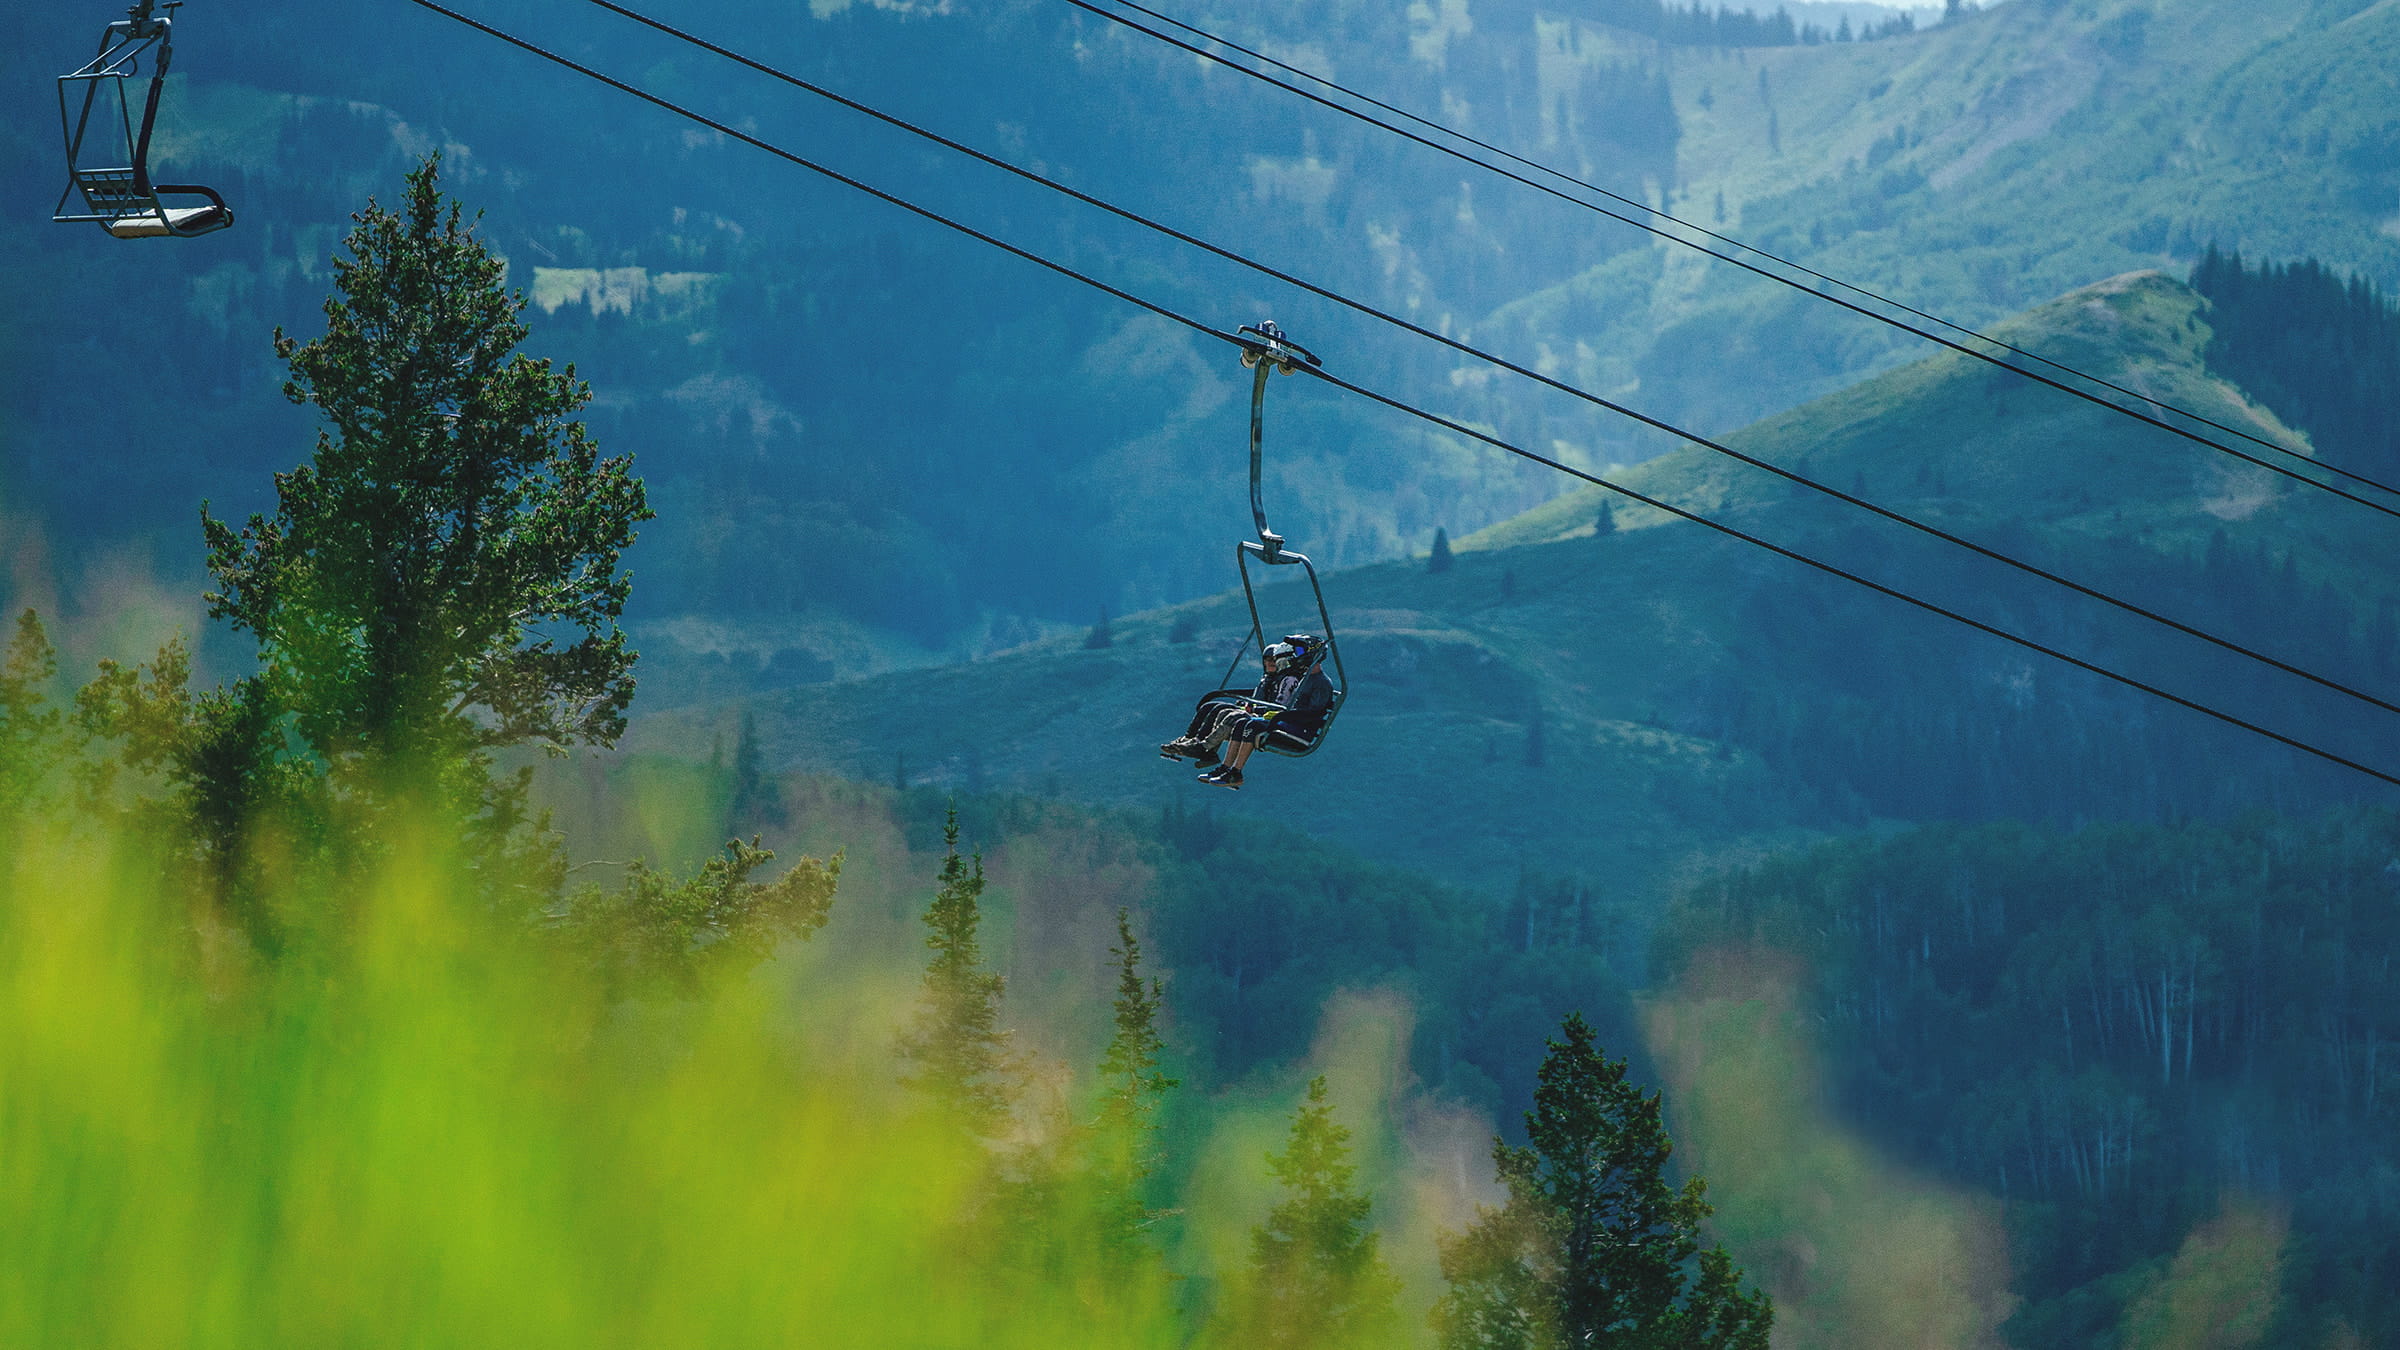 Guests riding chairlift during the summer at Deer Valley Resort.